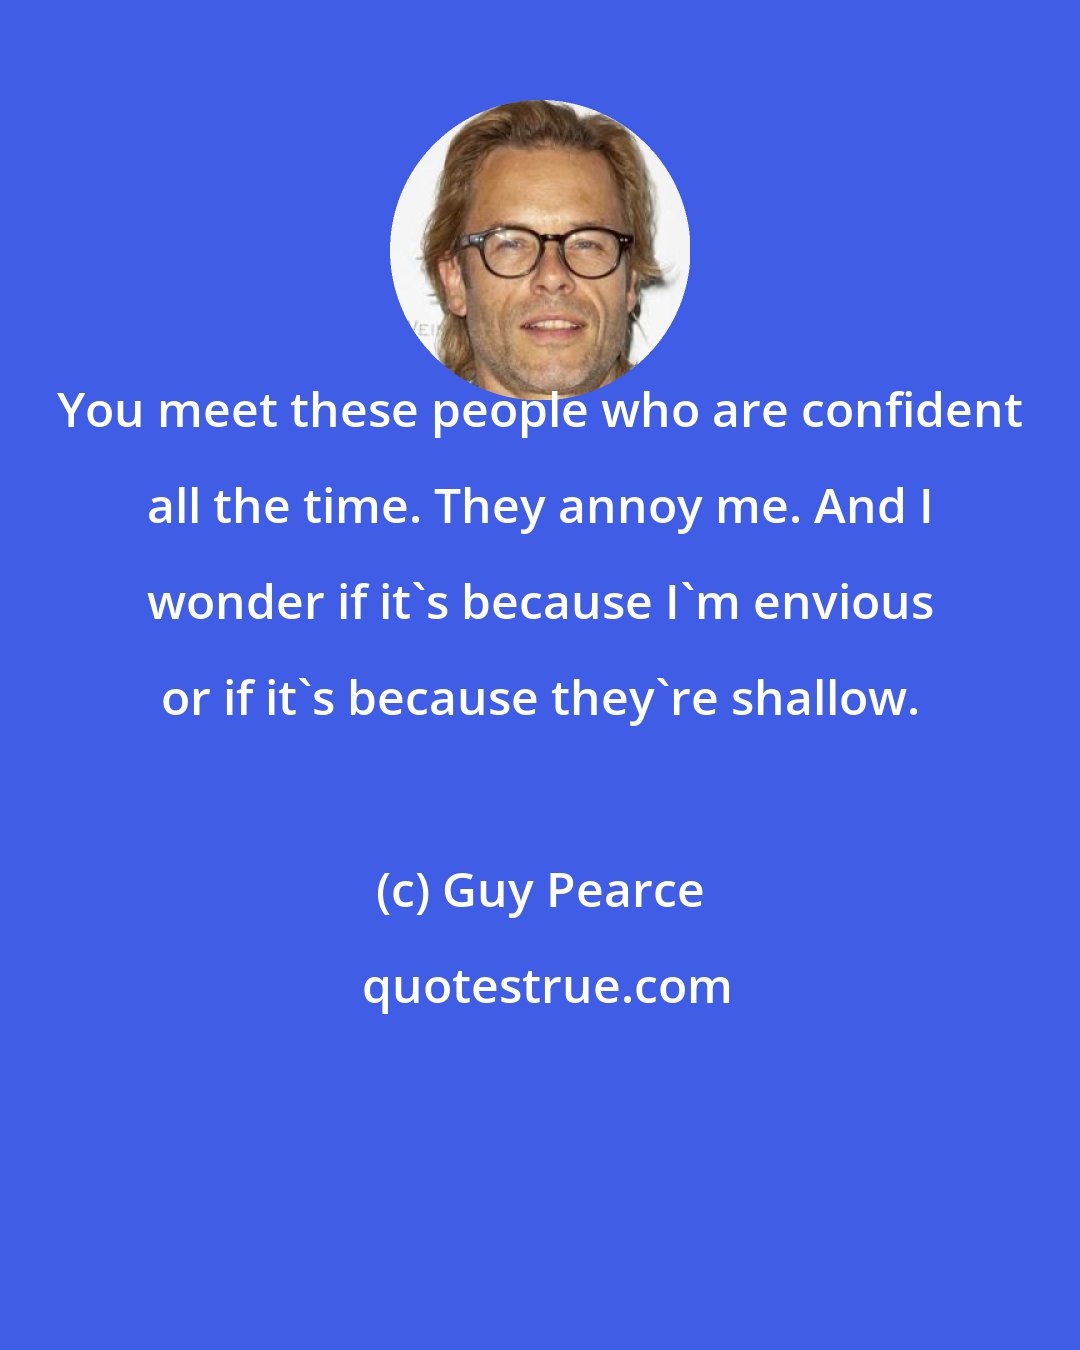 Guy Pearce: You meet these people who are confident all the time. They annoy me. And I wonder if it's because I'm envious or if it's because they're shallow.